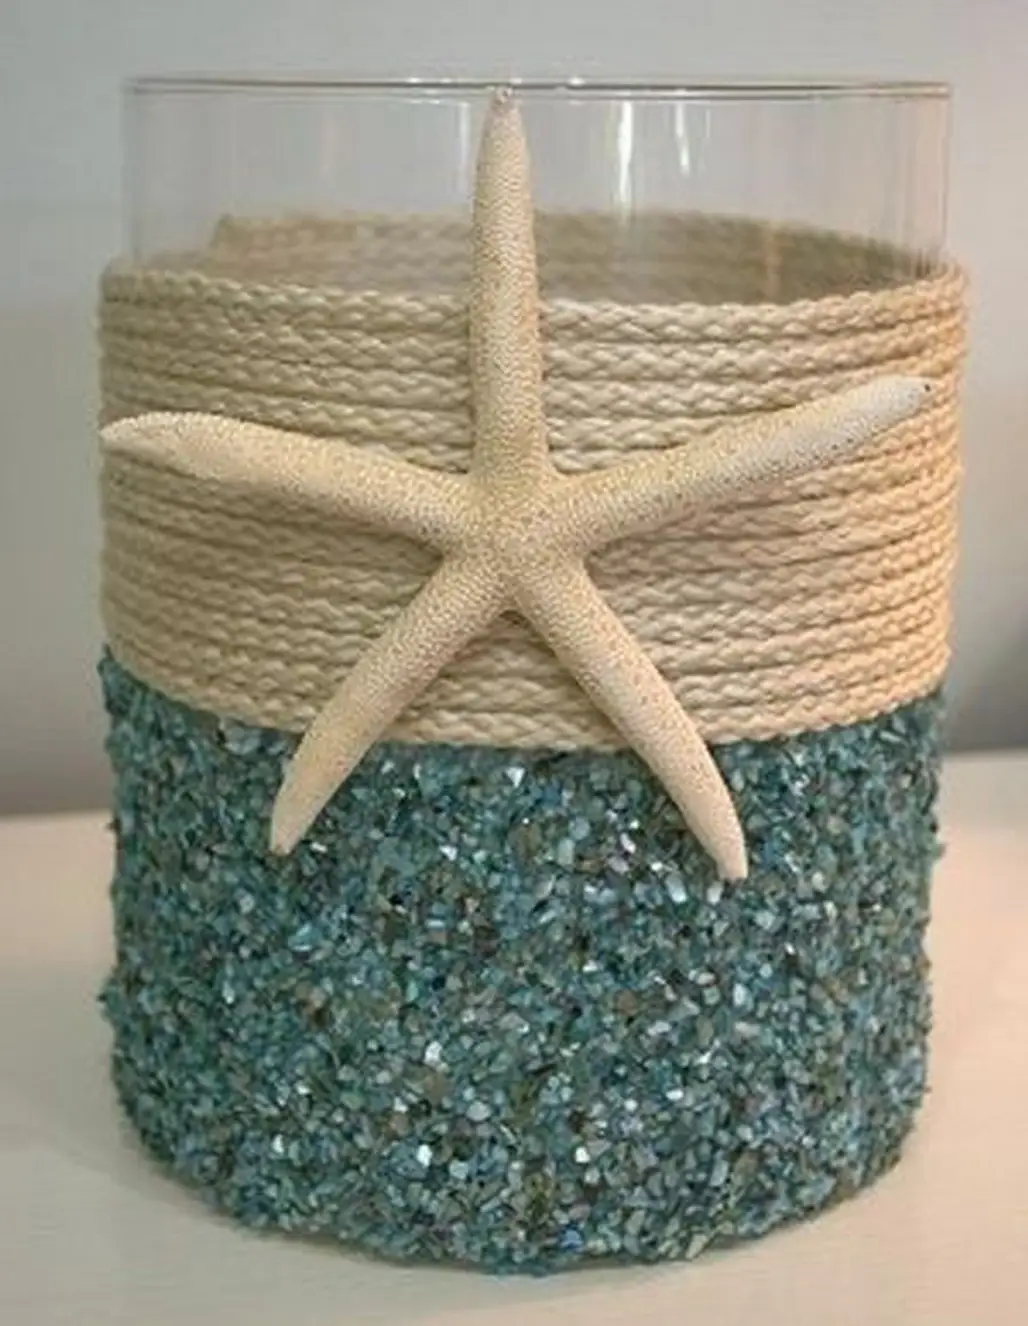 Cover a Coastal Candle Holder in Twine and Glitter